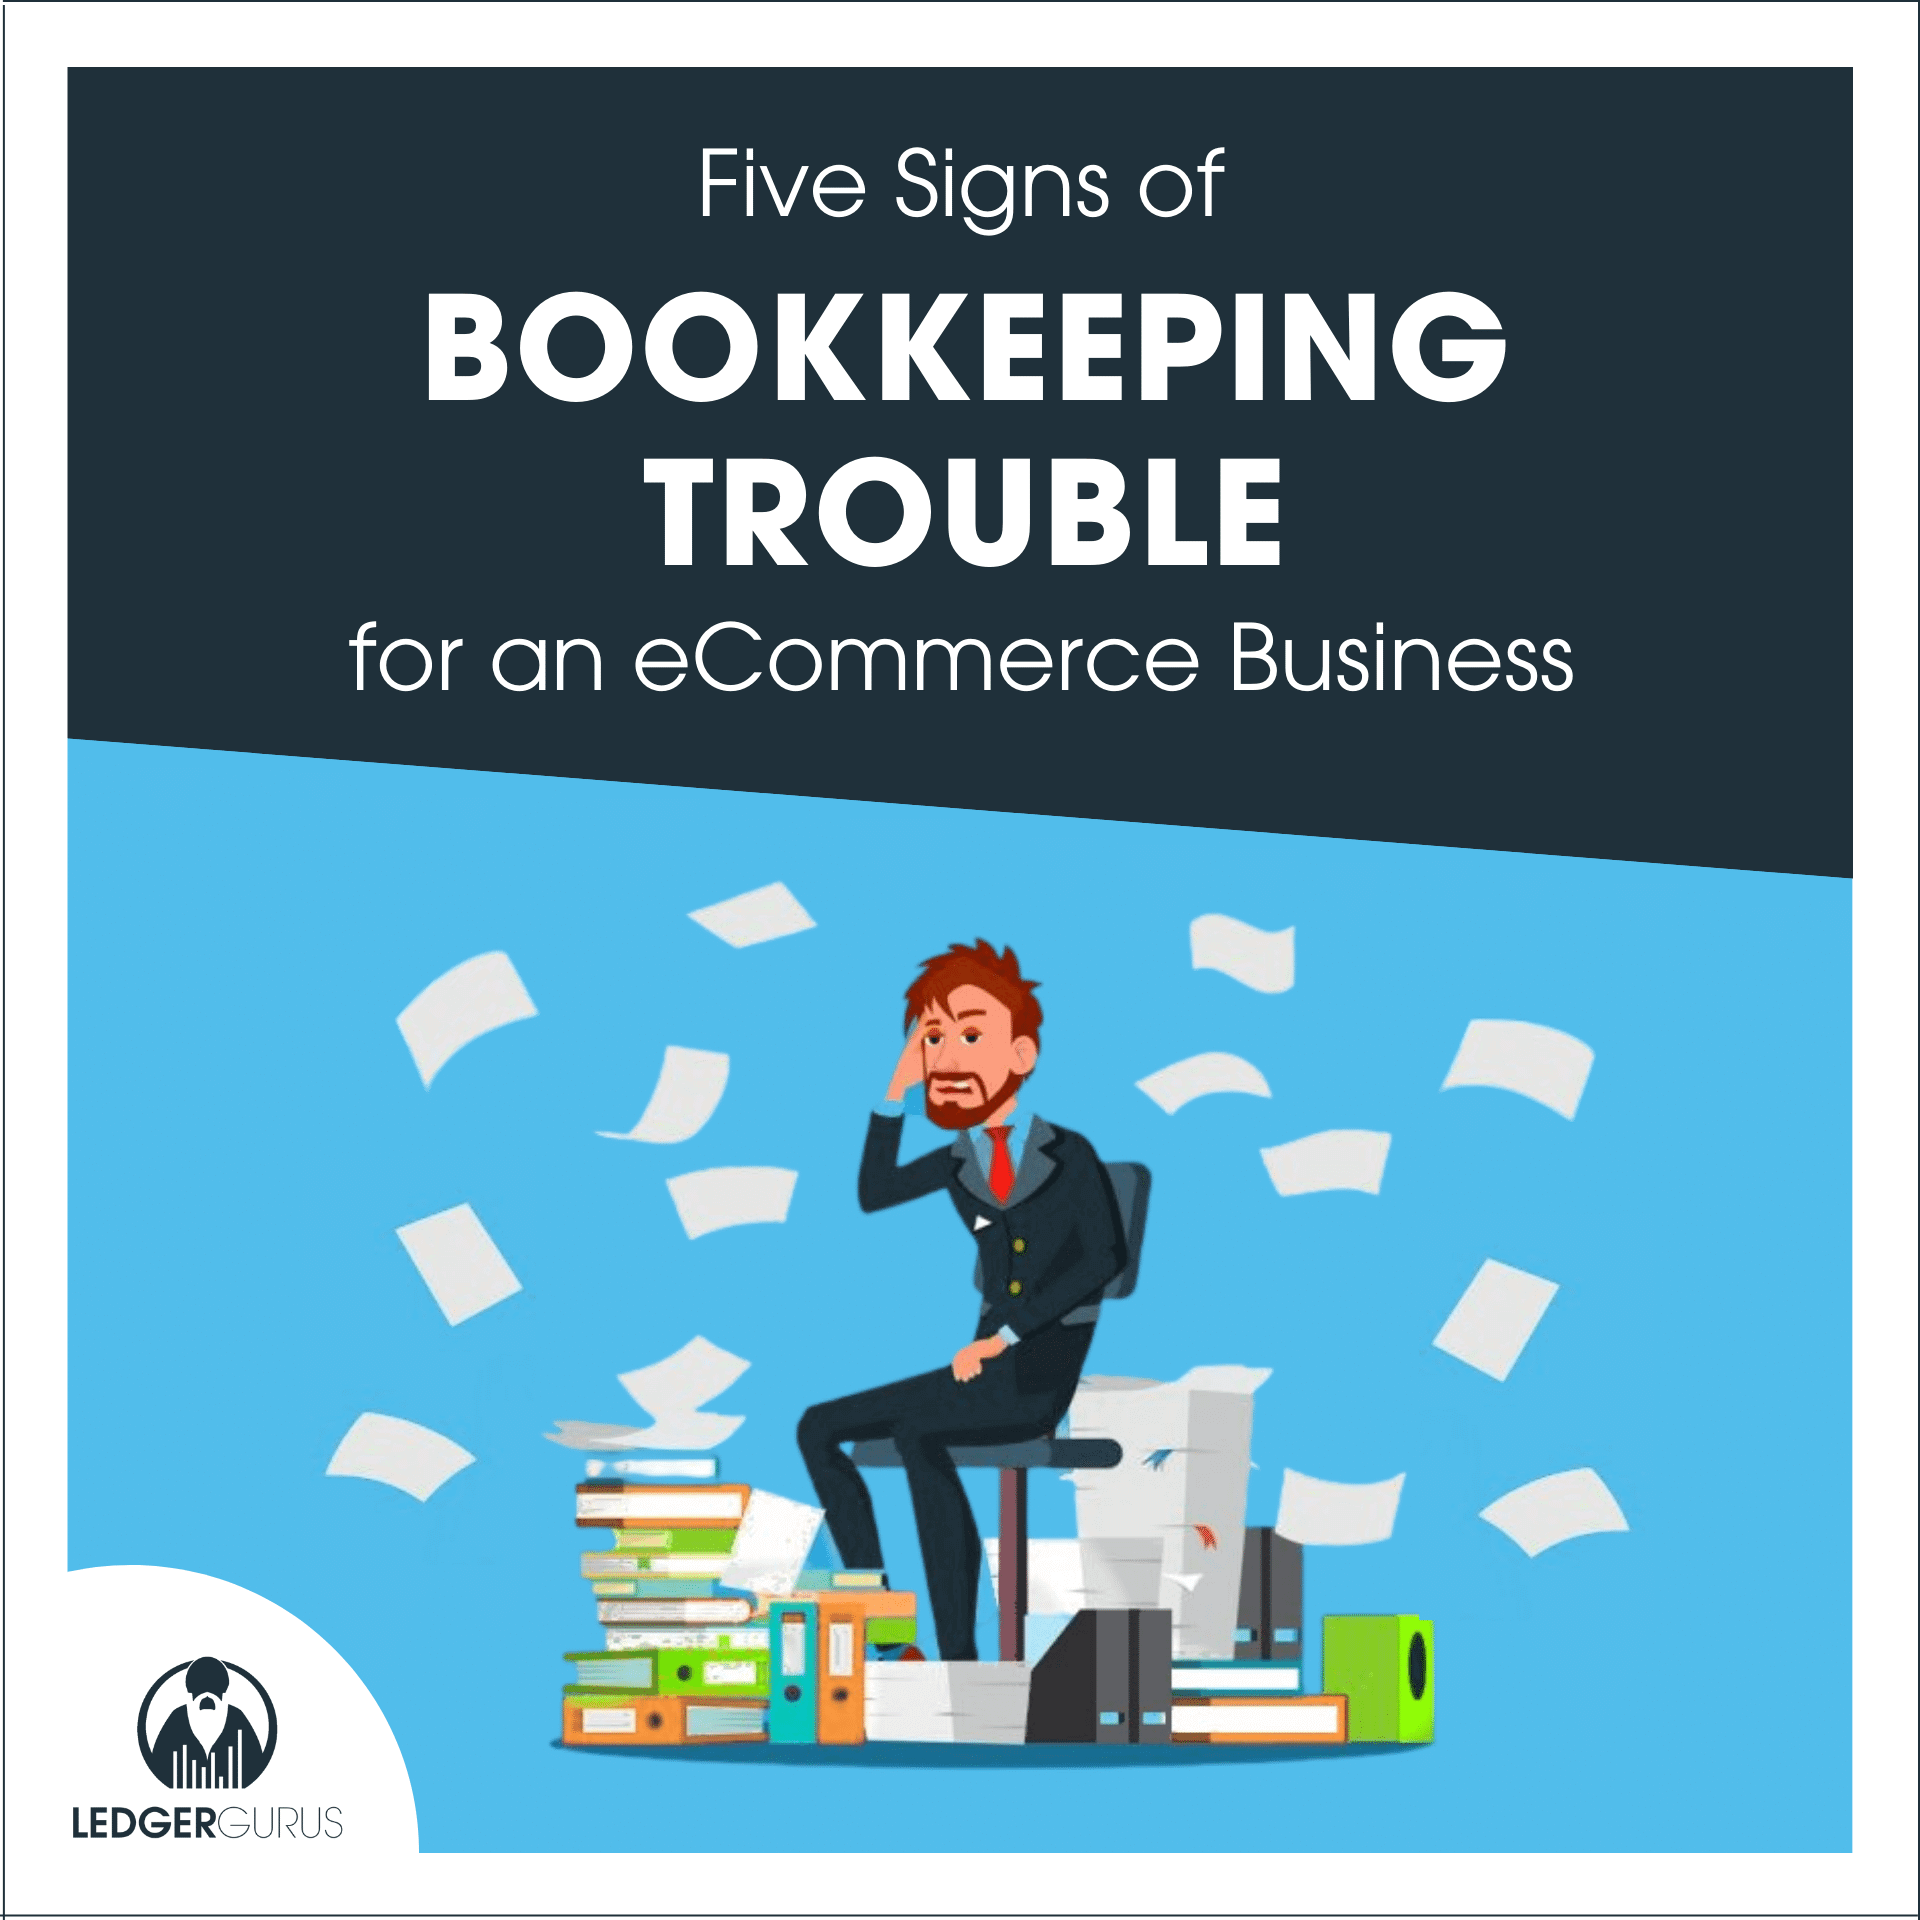 5 signs of bookkeeping trouble for an ecommerce business